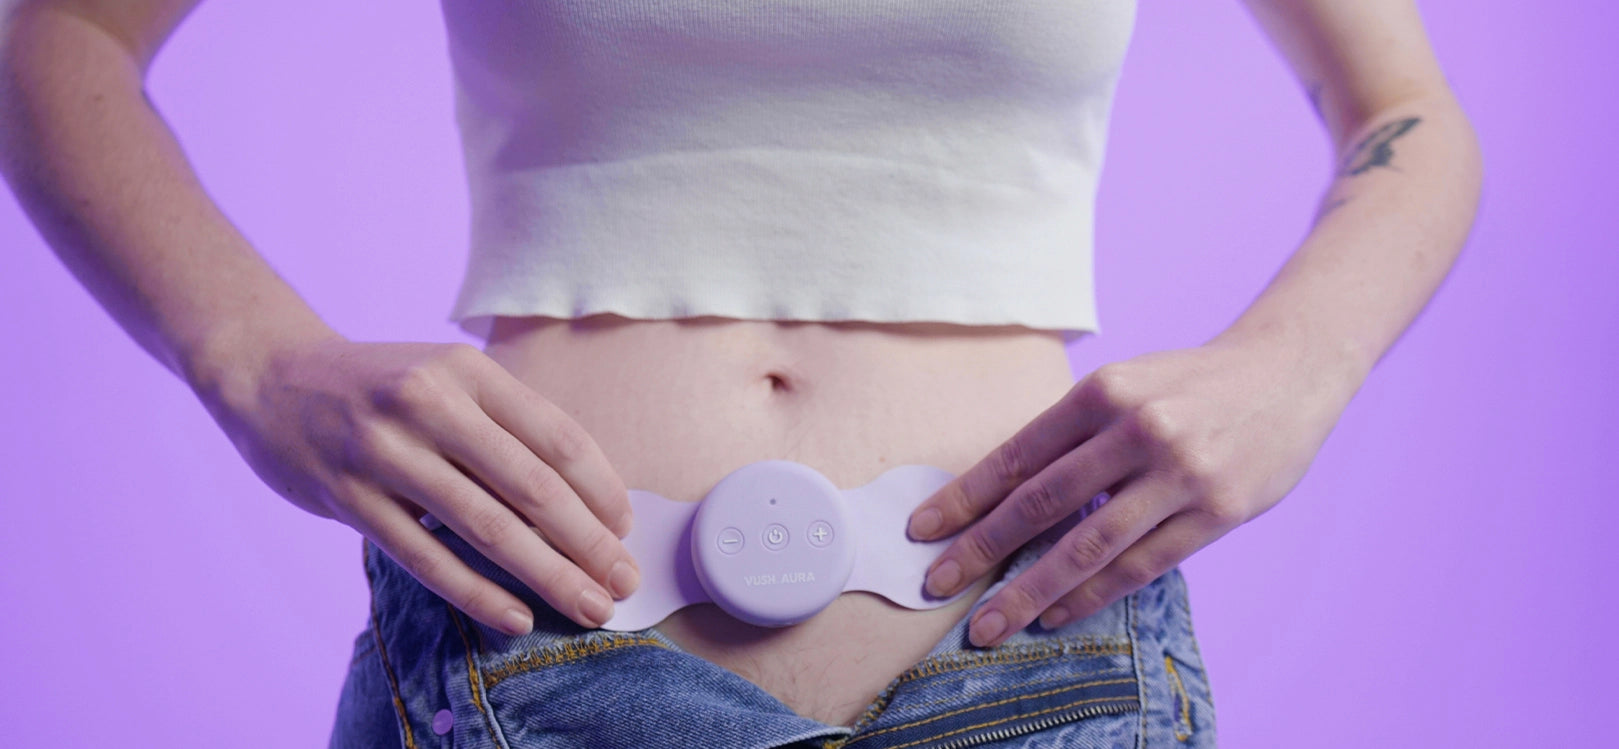 Close up of midriff with Aura pain relief device sitting on lower stomach